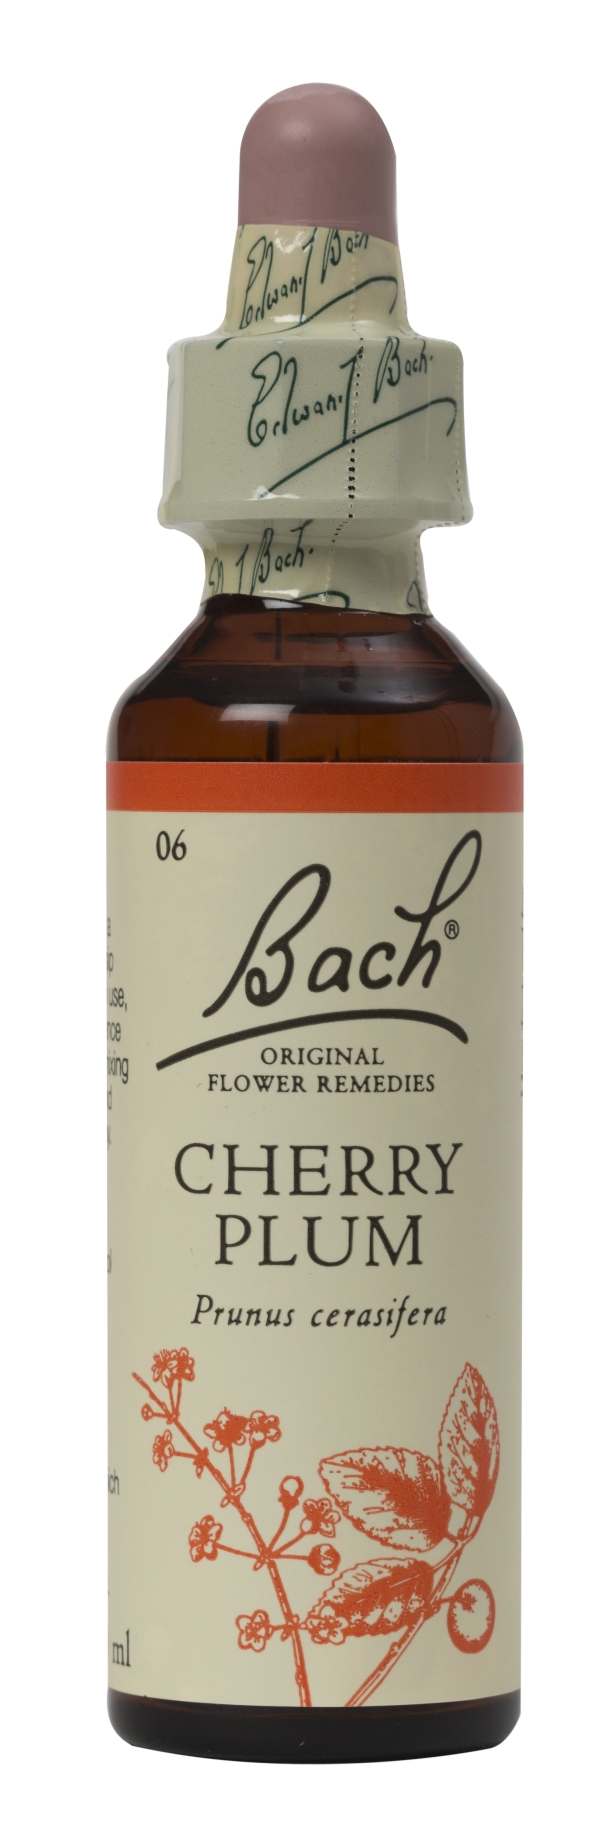 Nelson Bach Flower Remedies: Bach Cherry Plum Flower Remedy (20ml) available online here